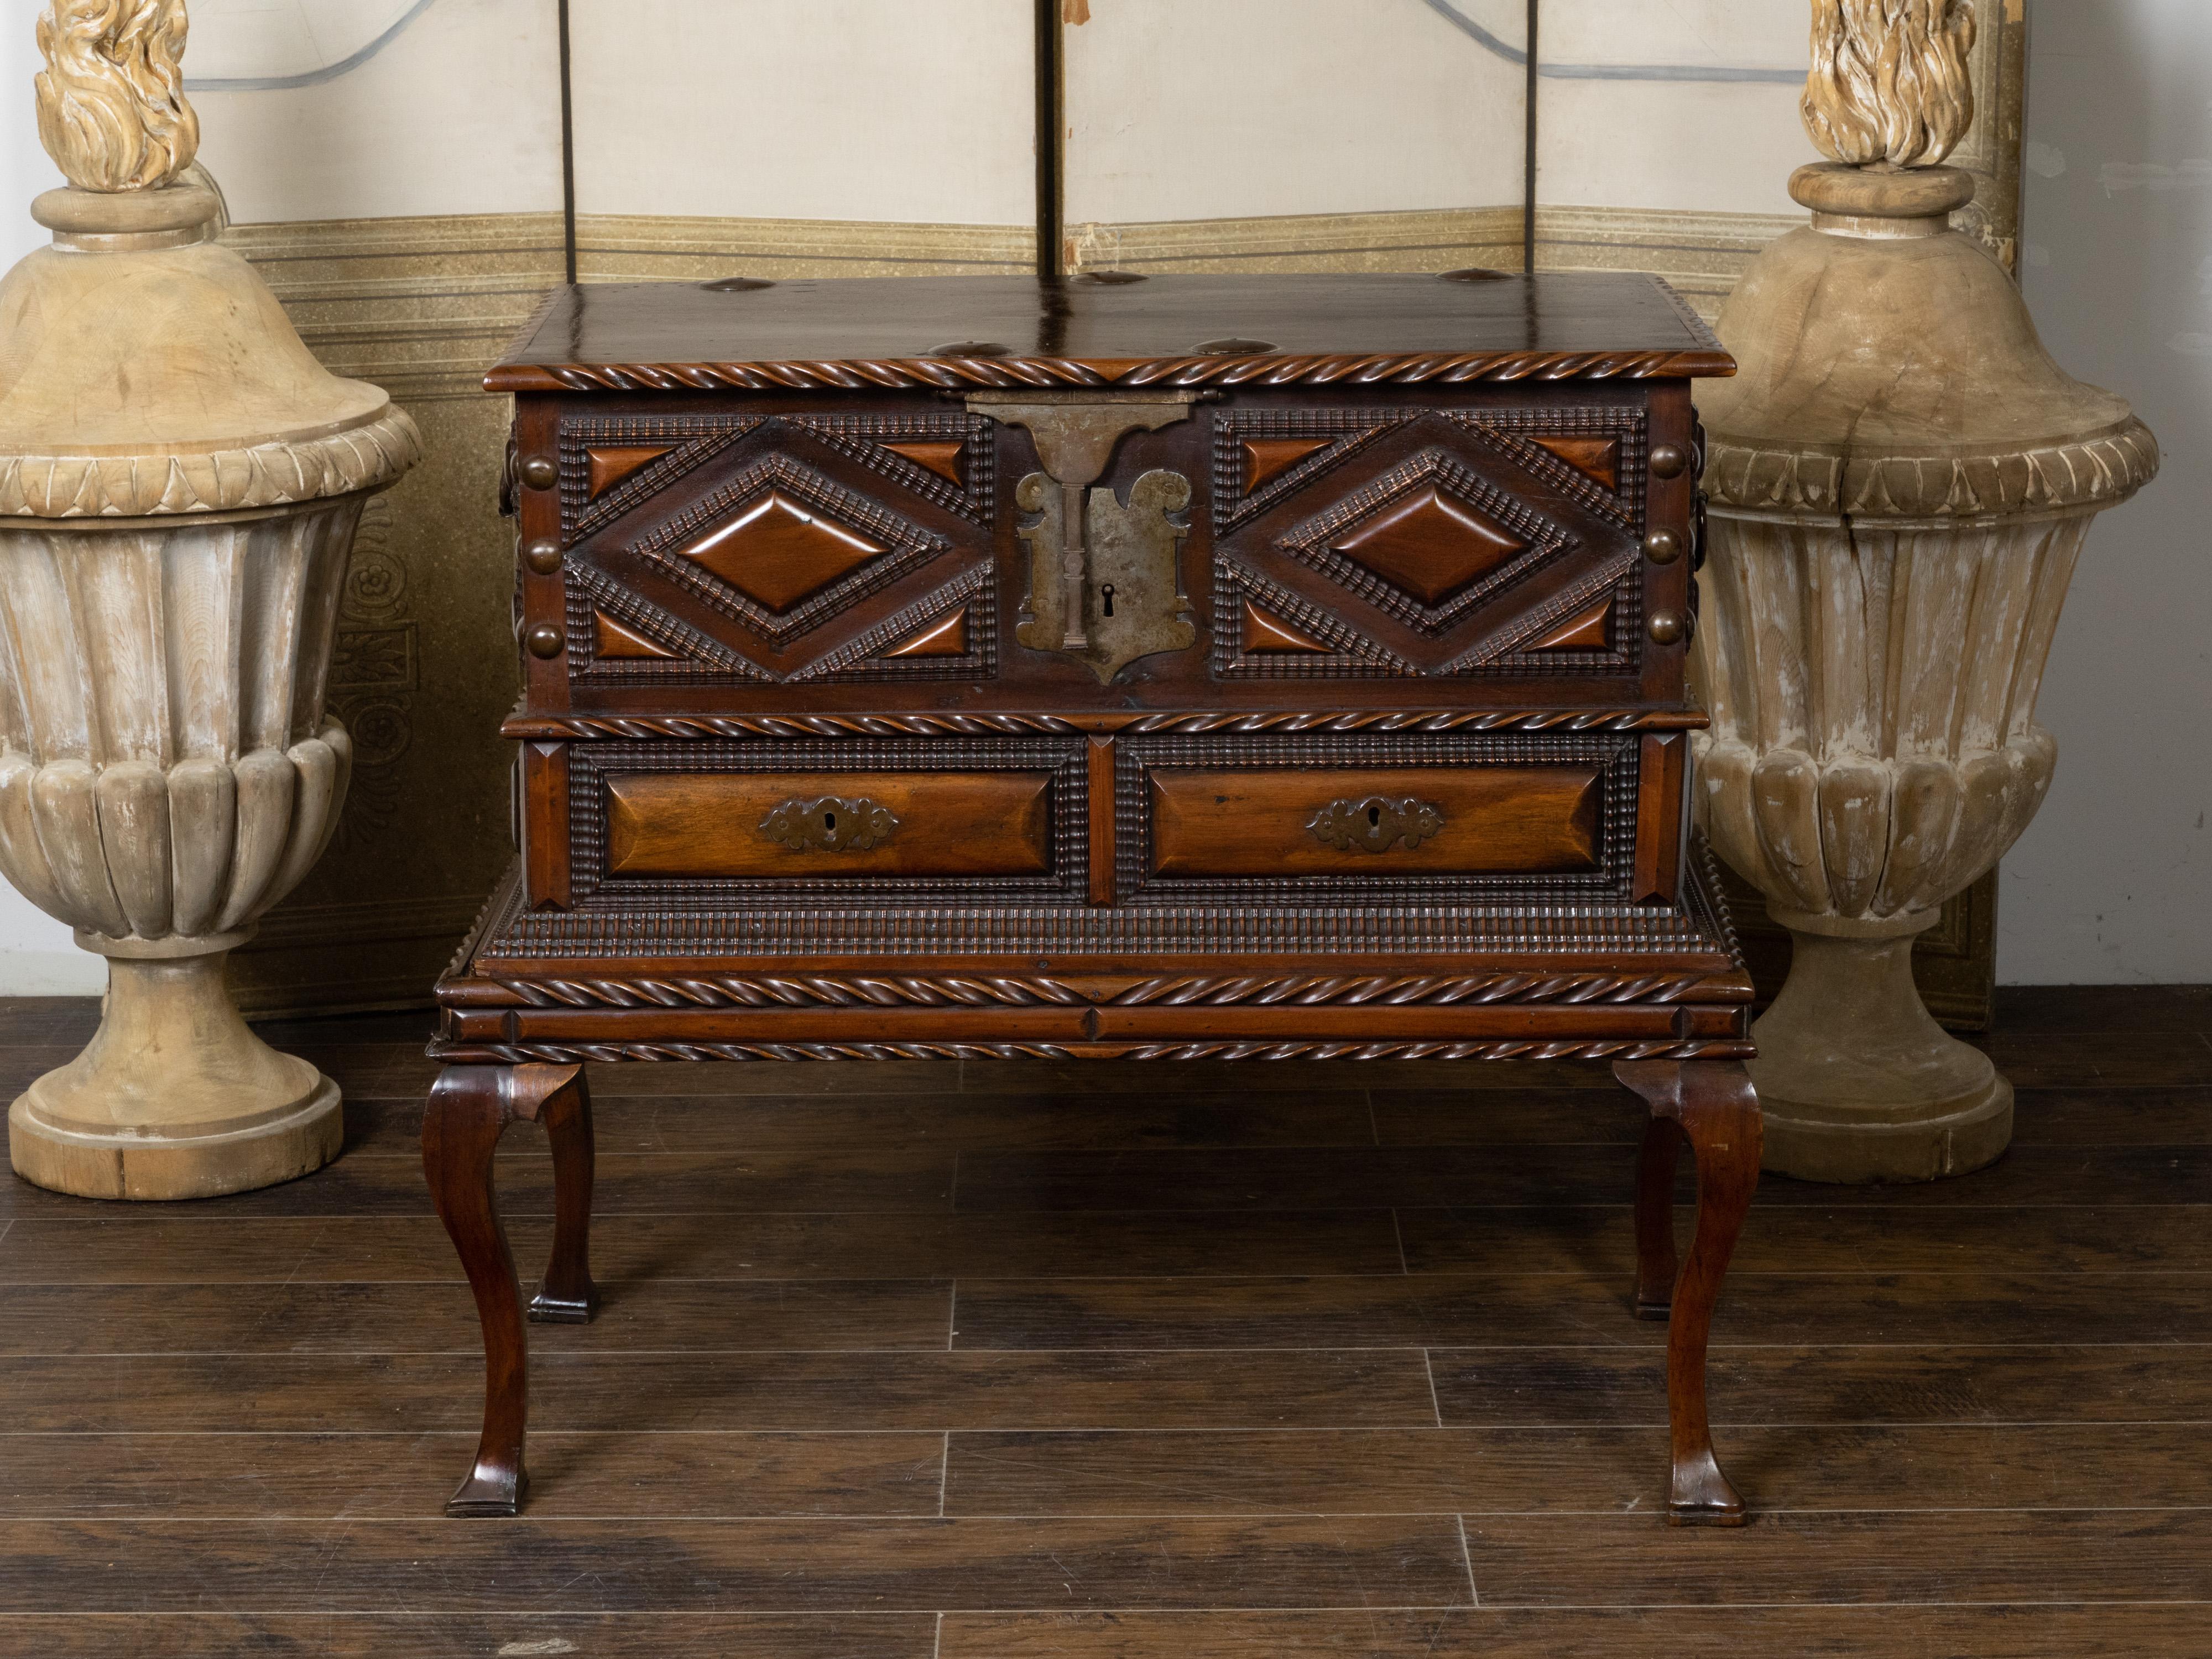 An Anglo-Indian geometric front mahogany coffer on base from the 19th century, with lift top, carved panels, two drawers, cabriole legs and lateral handles. Hand-crafted during the 19th century, this Anglo-Indian mahogany coffer features a